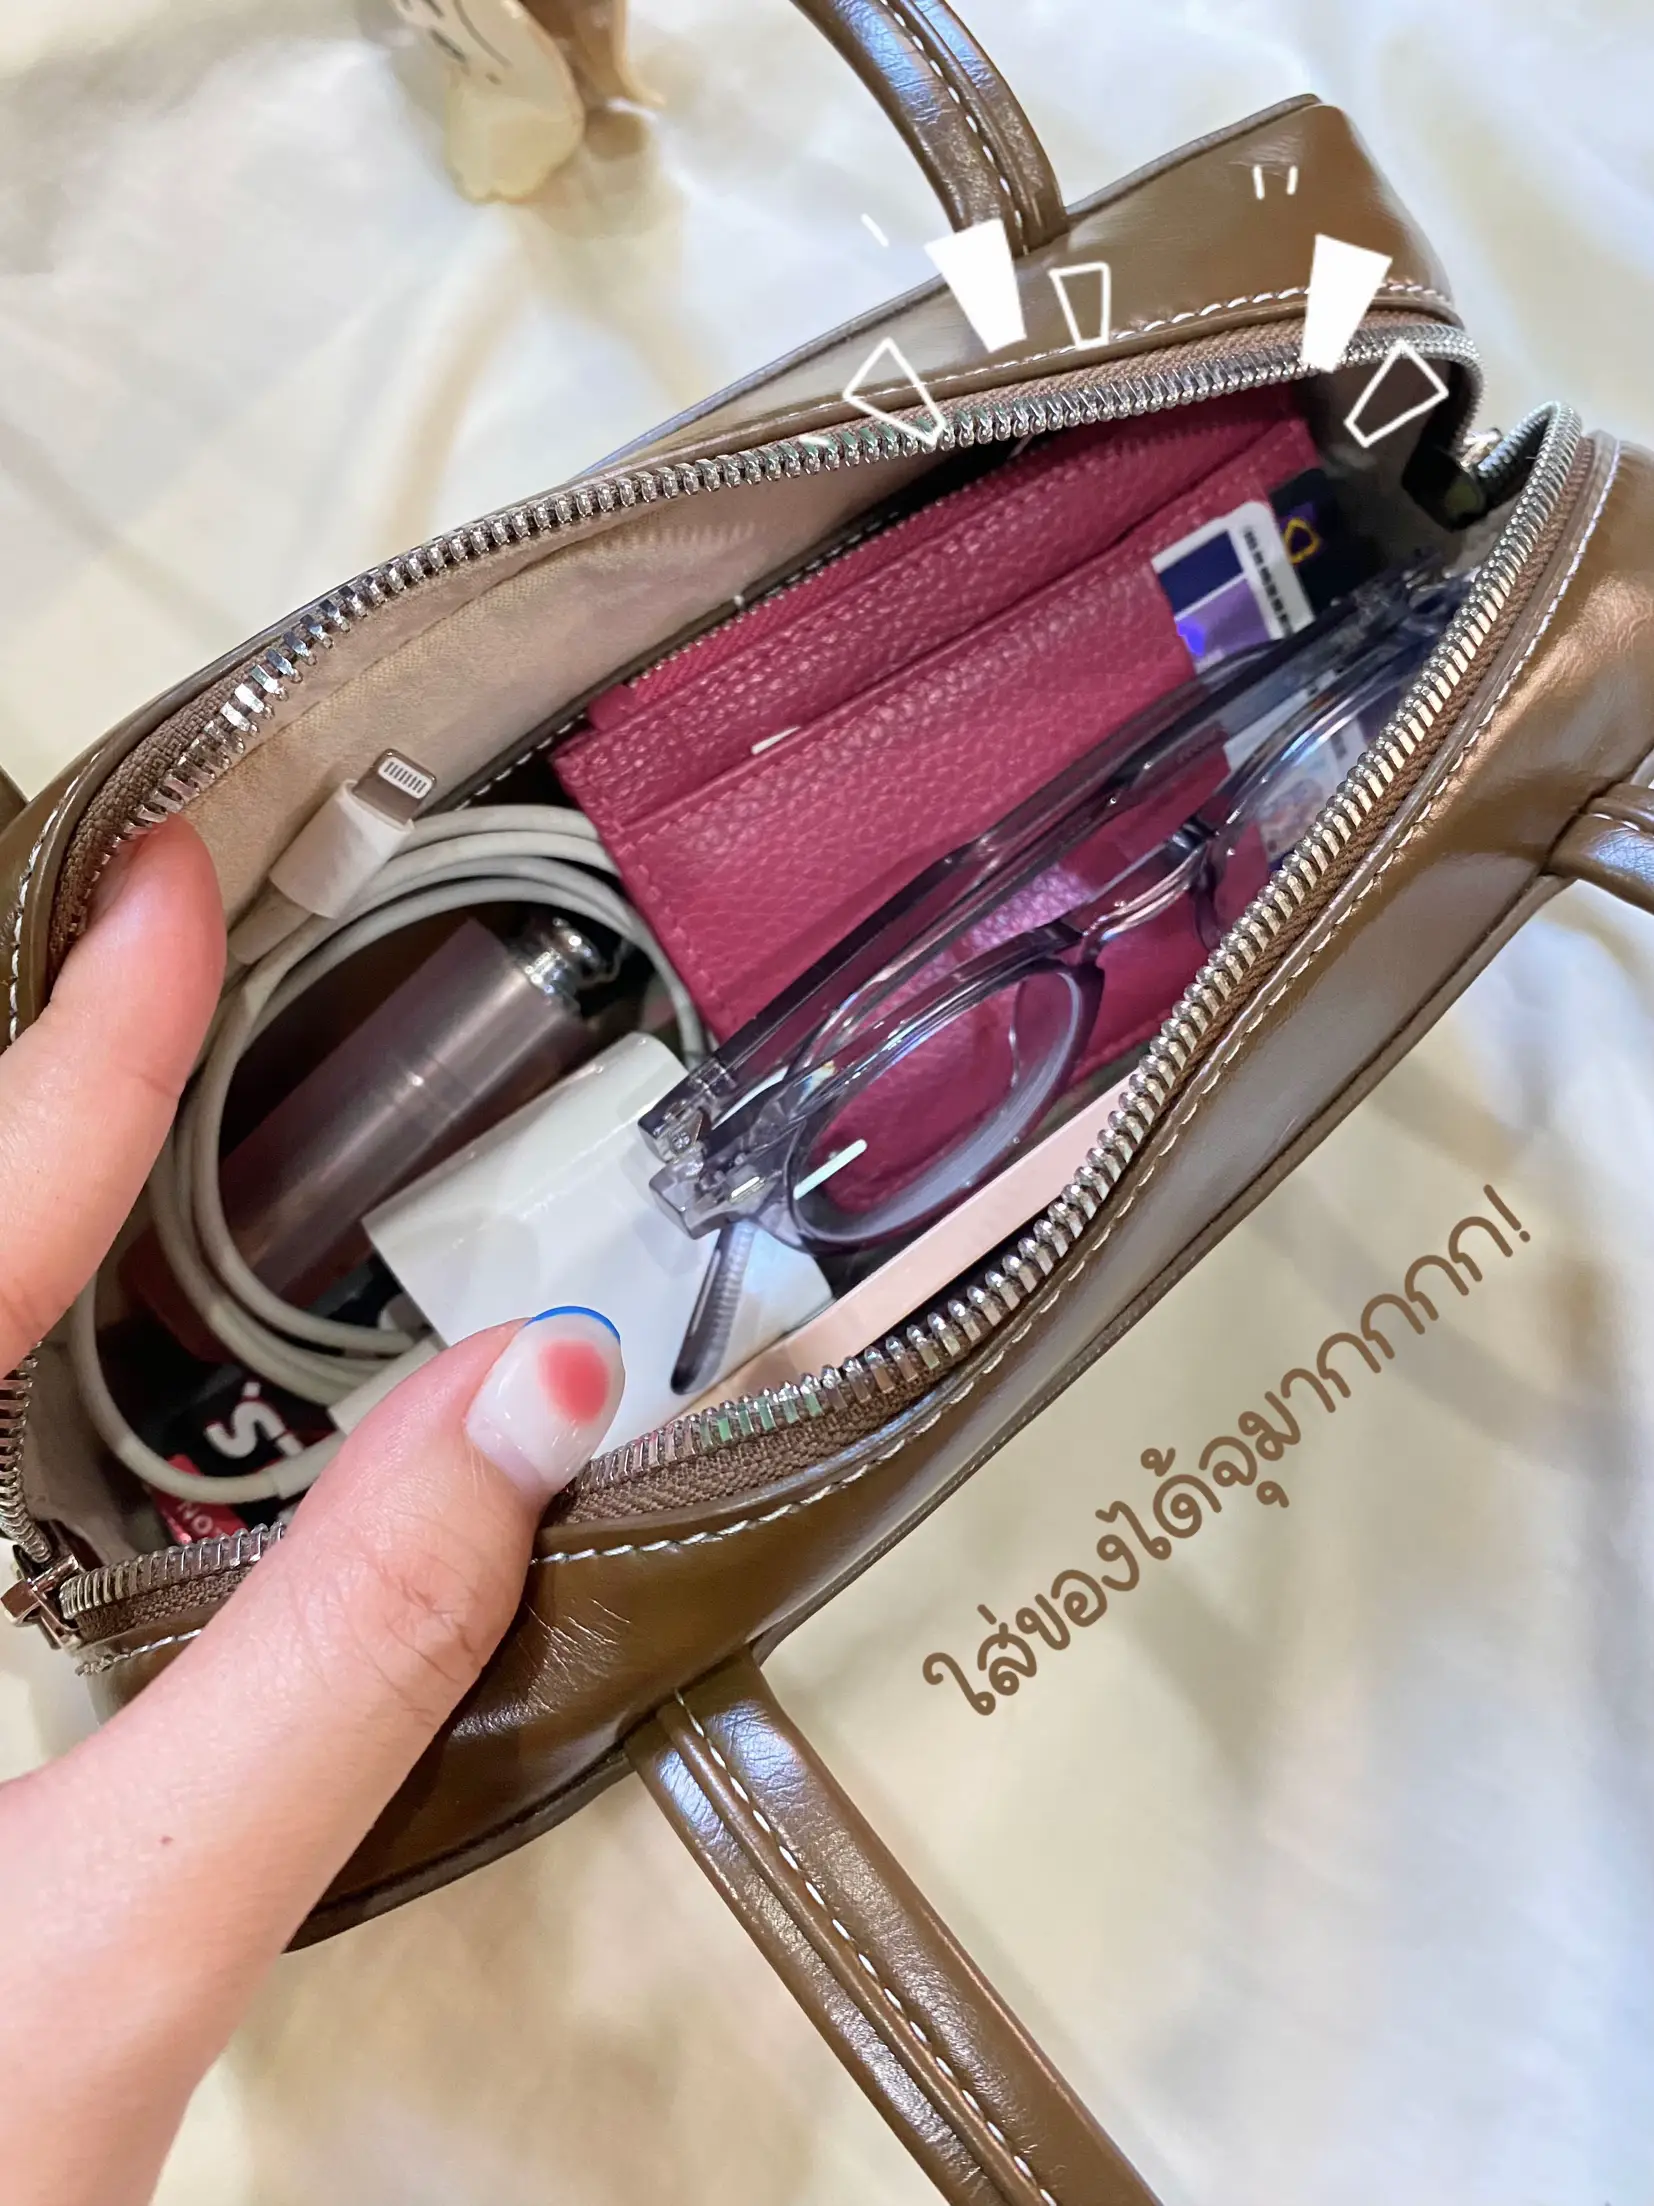 The 5 Must-Have Handbag Review